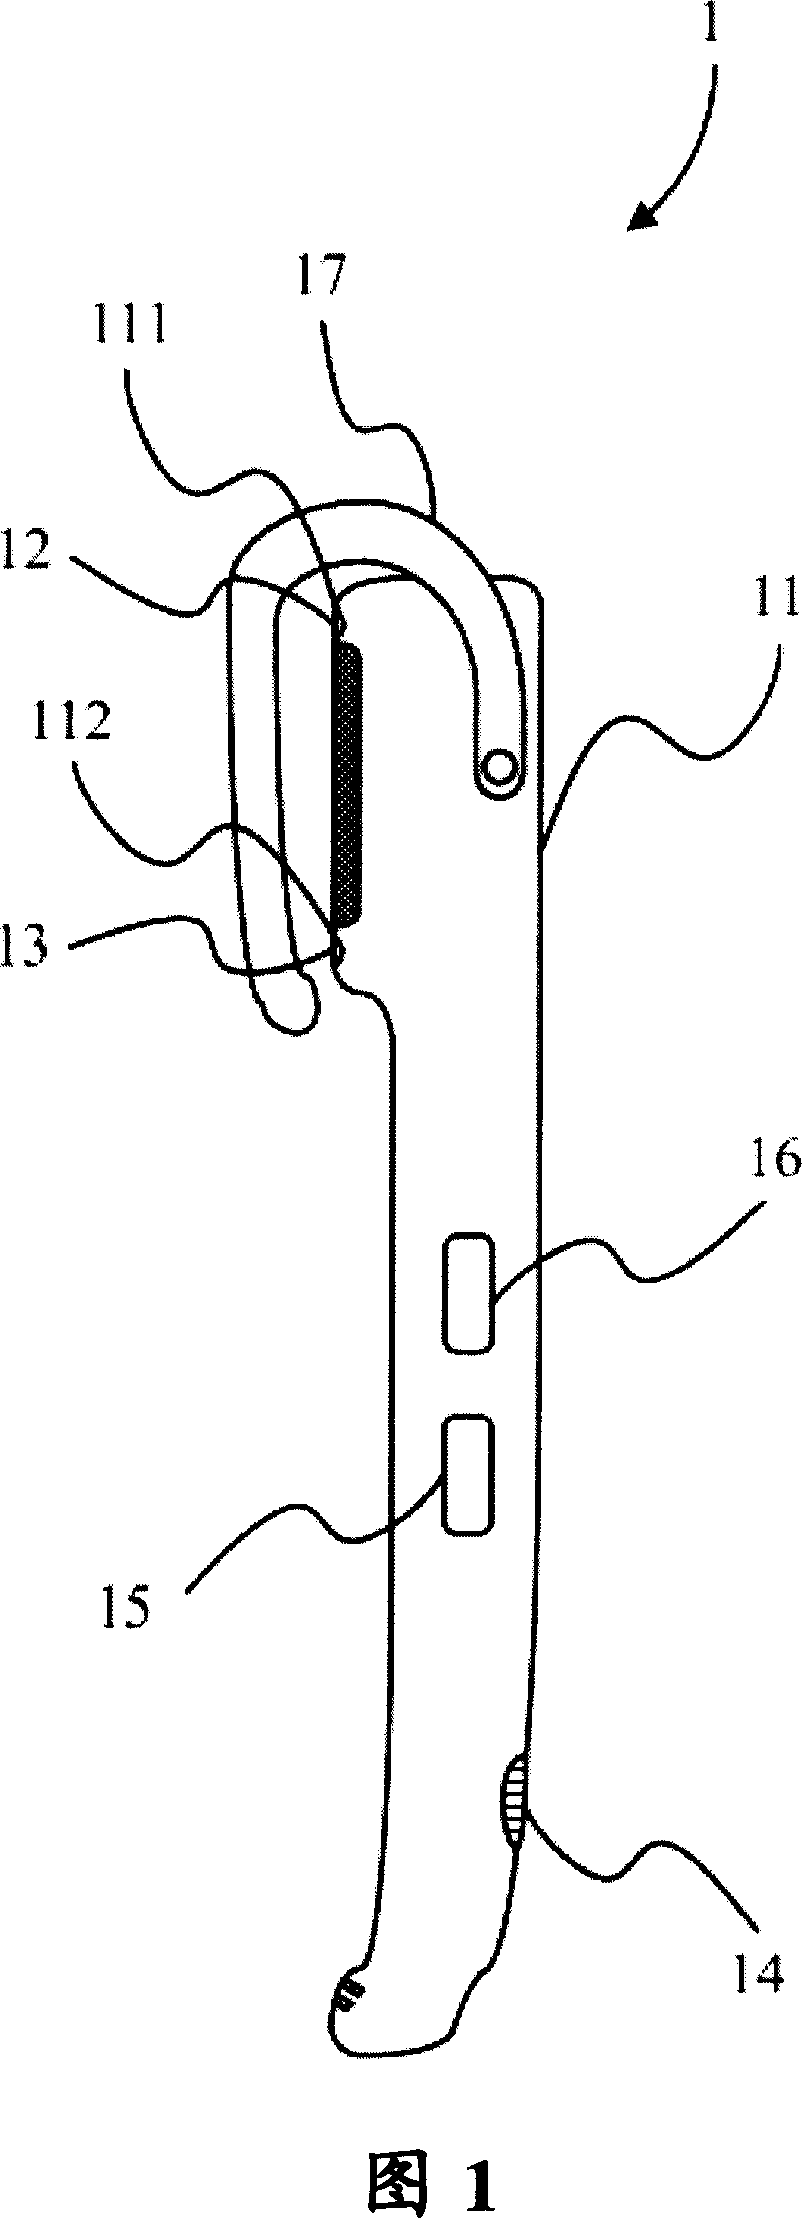 Earphone device capable of communicating with mobile communication equipment